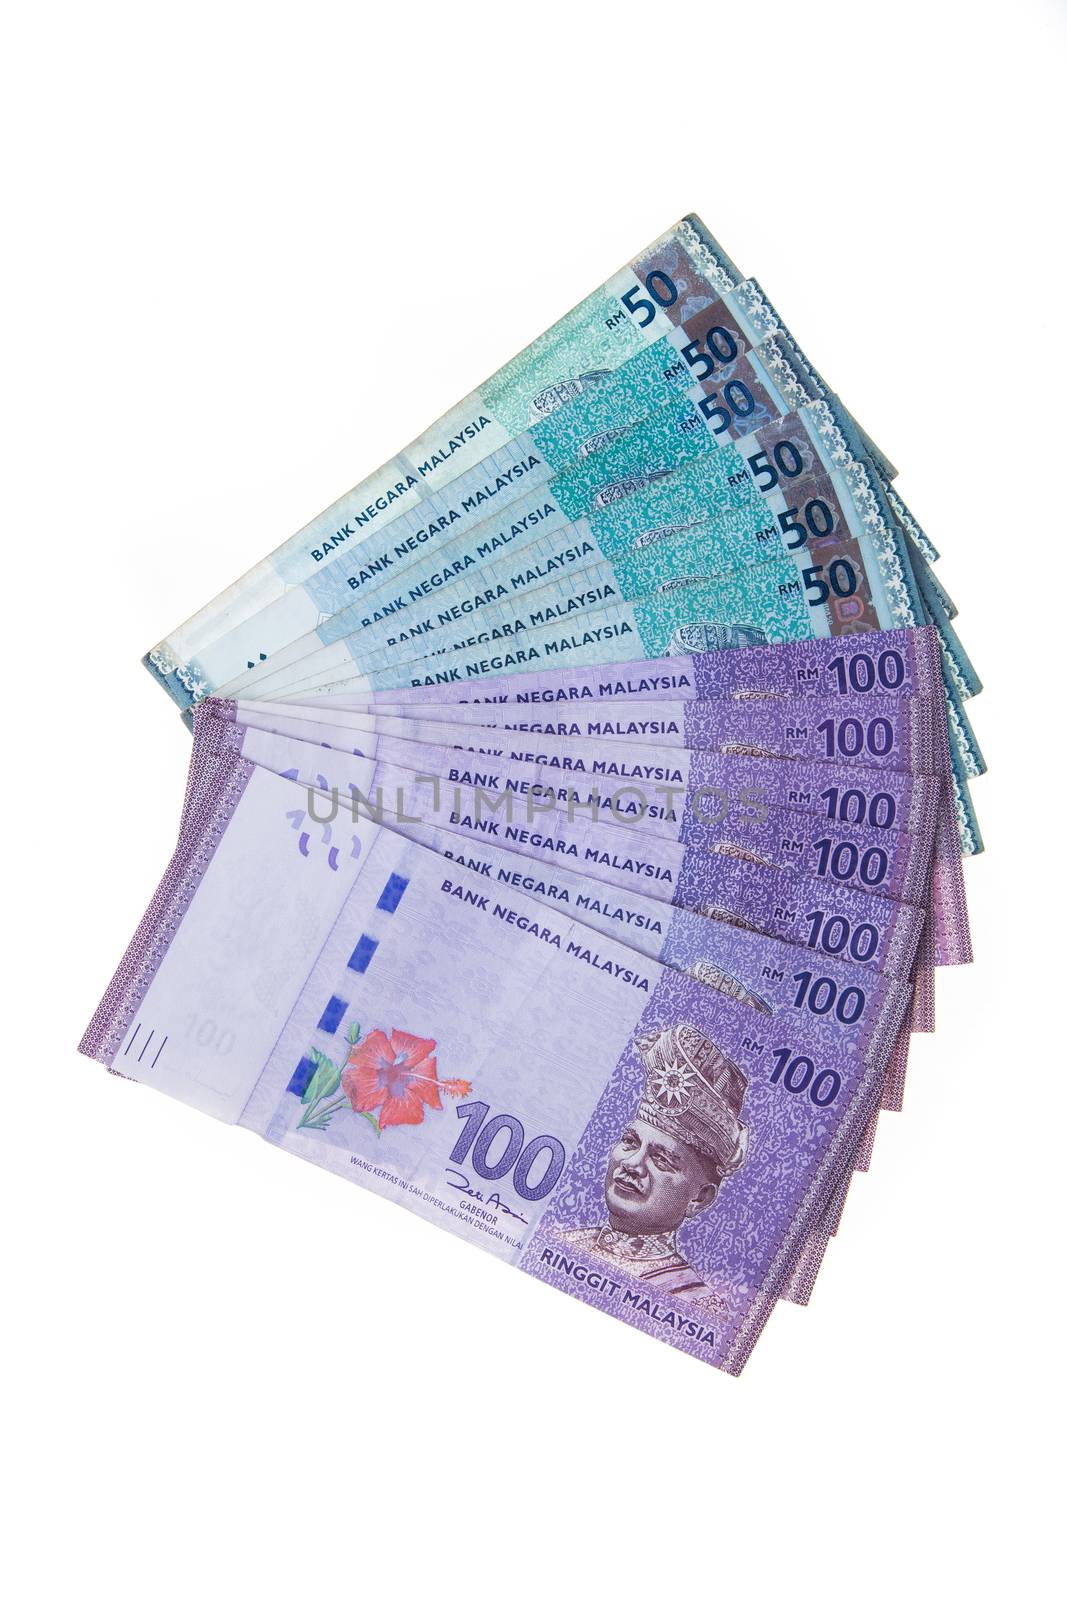 Malaysian currency by tehcheesiong